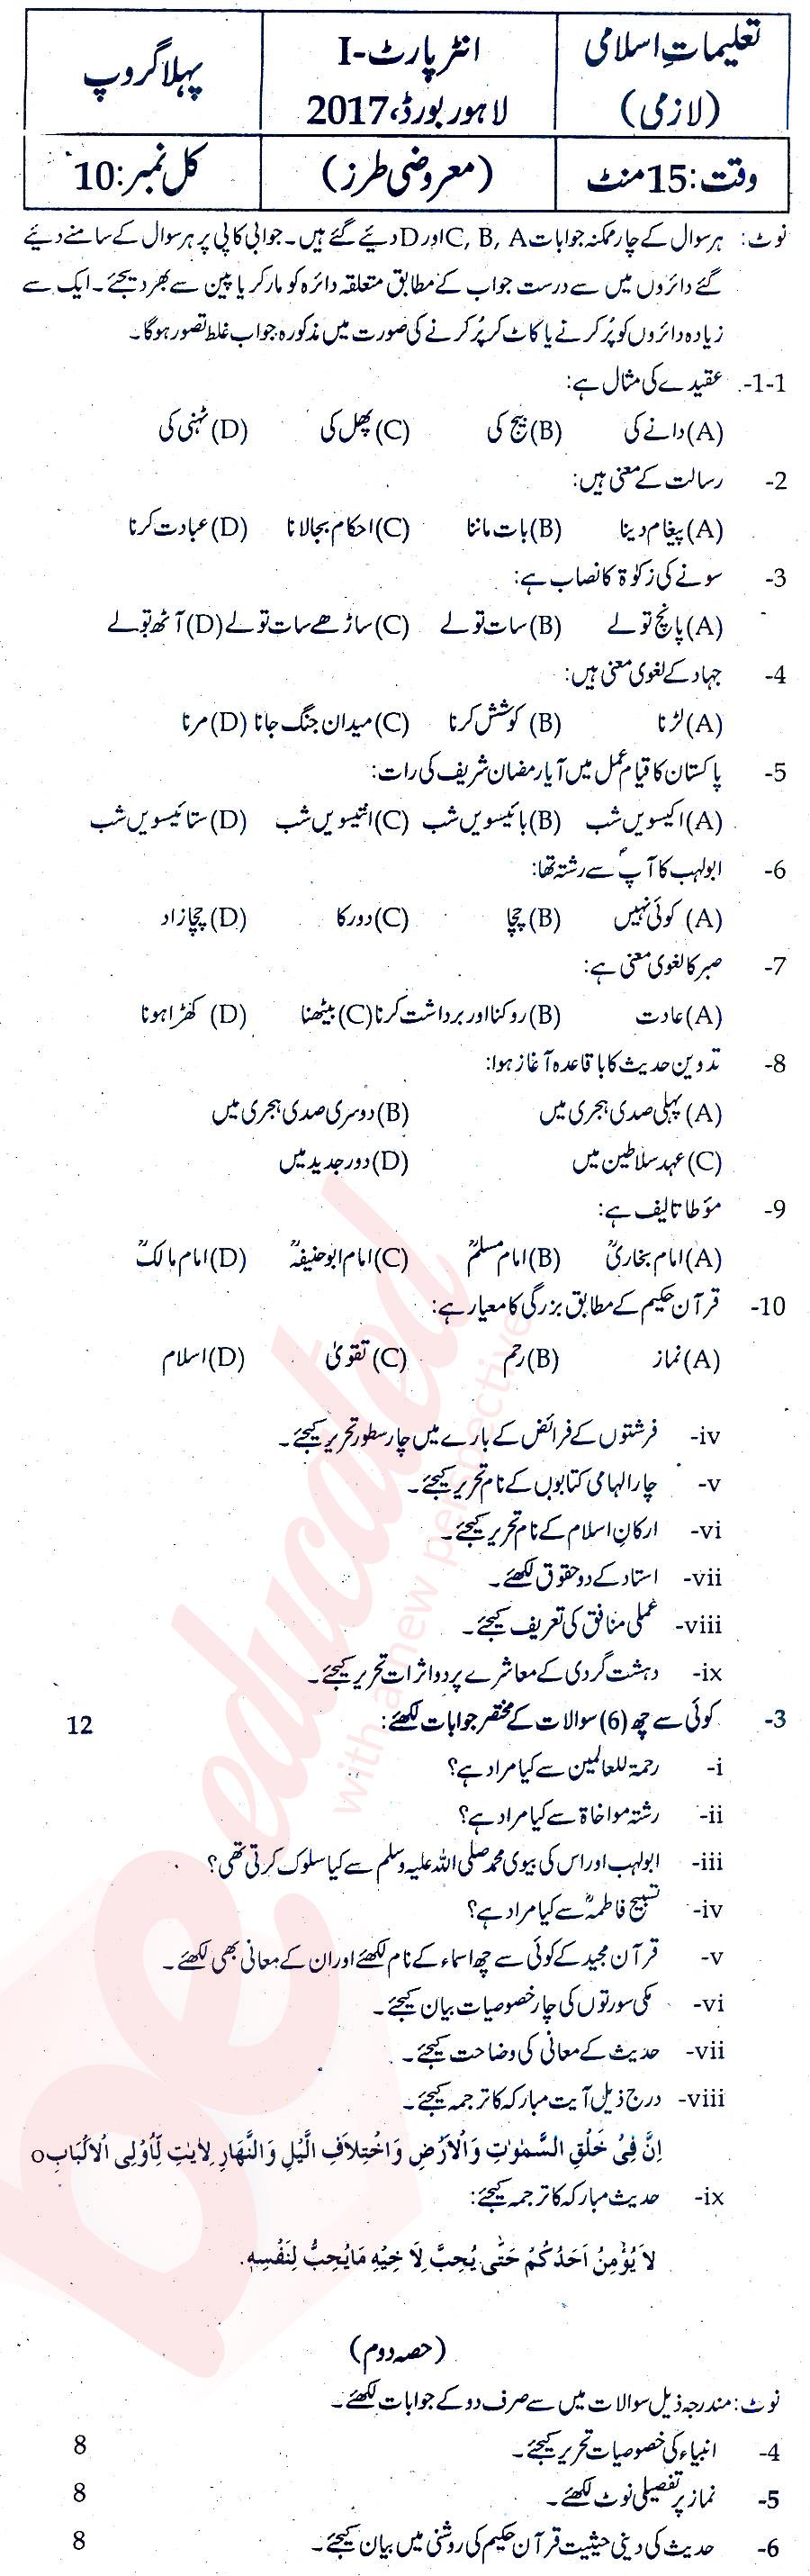 Islamic Studies 11th class Past Paper Group 1 BISE Lahore 2017